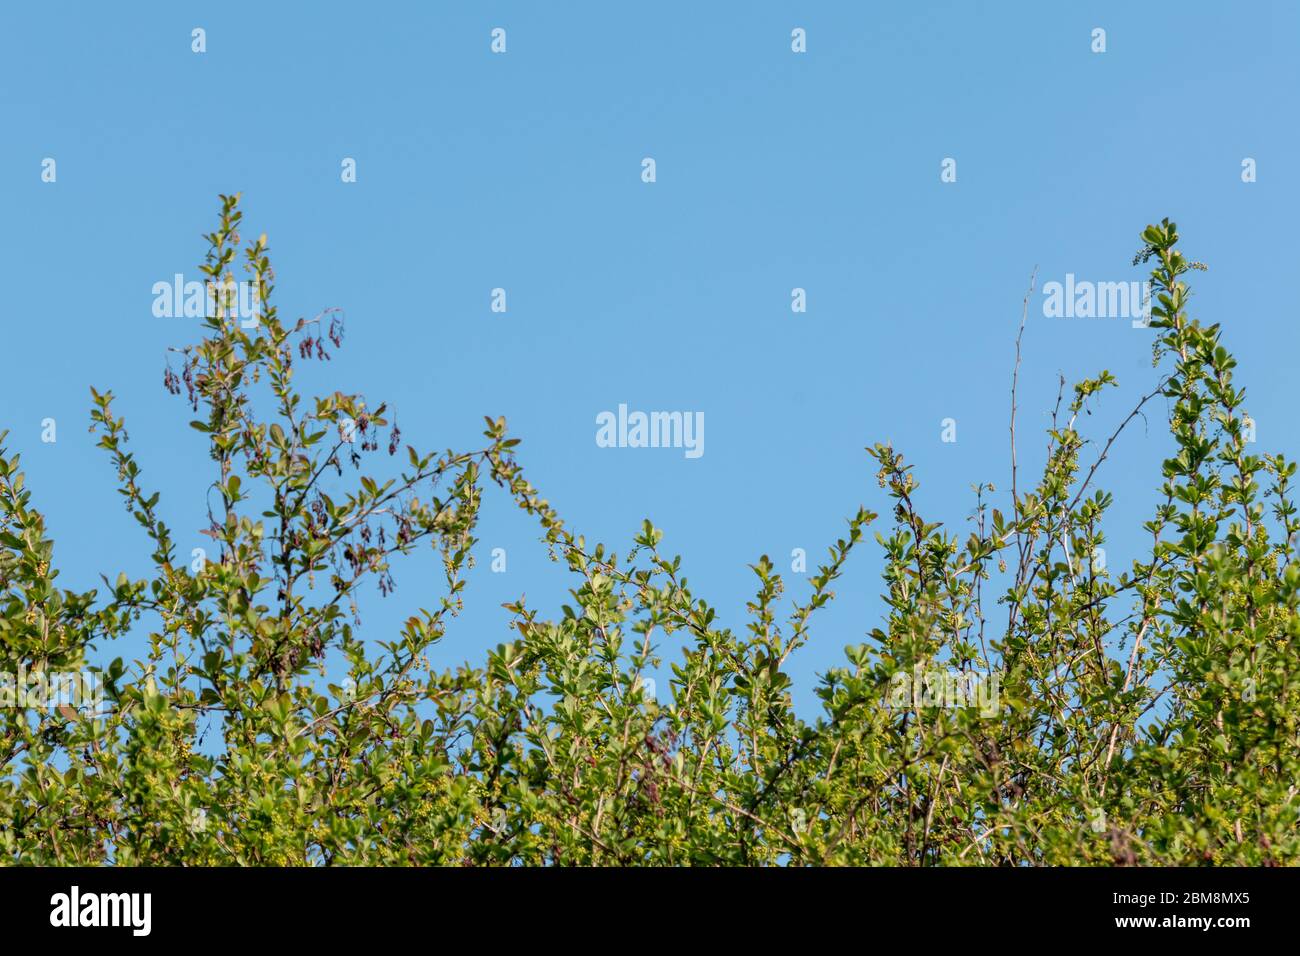 Green Berberis, barberry spice bush with dry seeds and flower buds on branches. Garden isolated green leaves on blue sunny sky Stock Photo